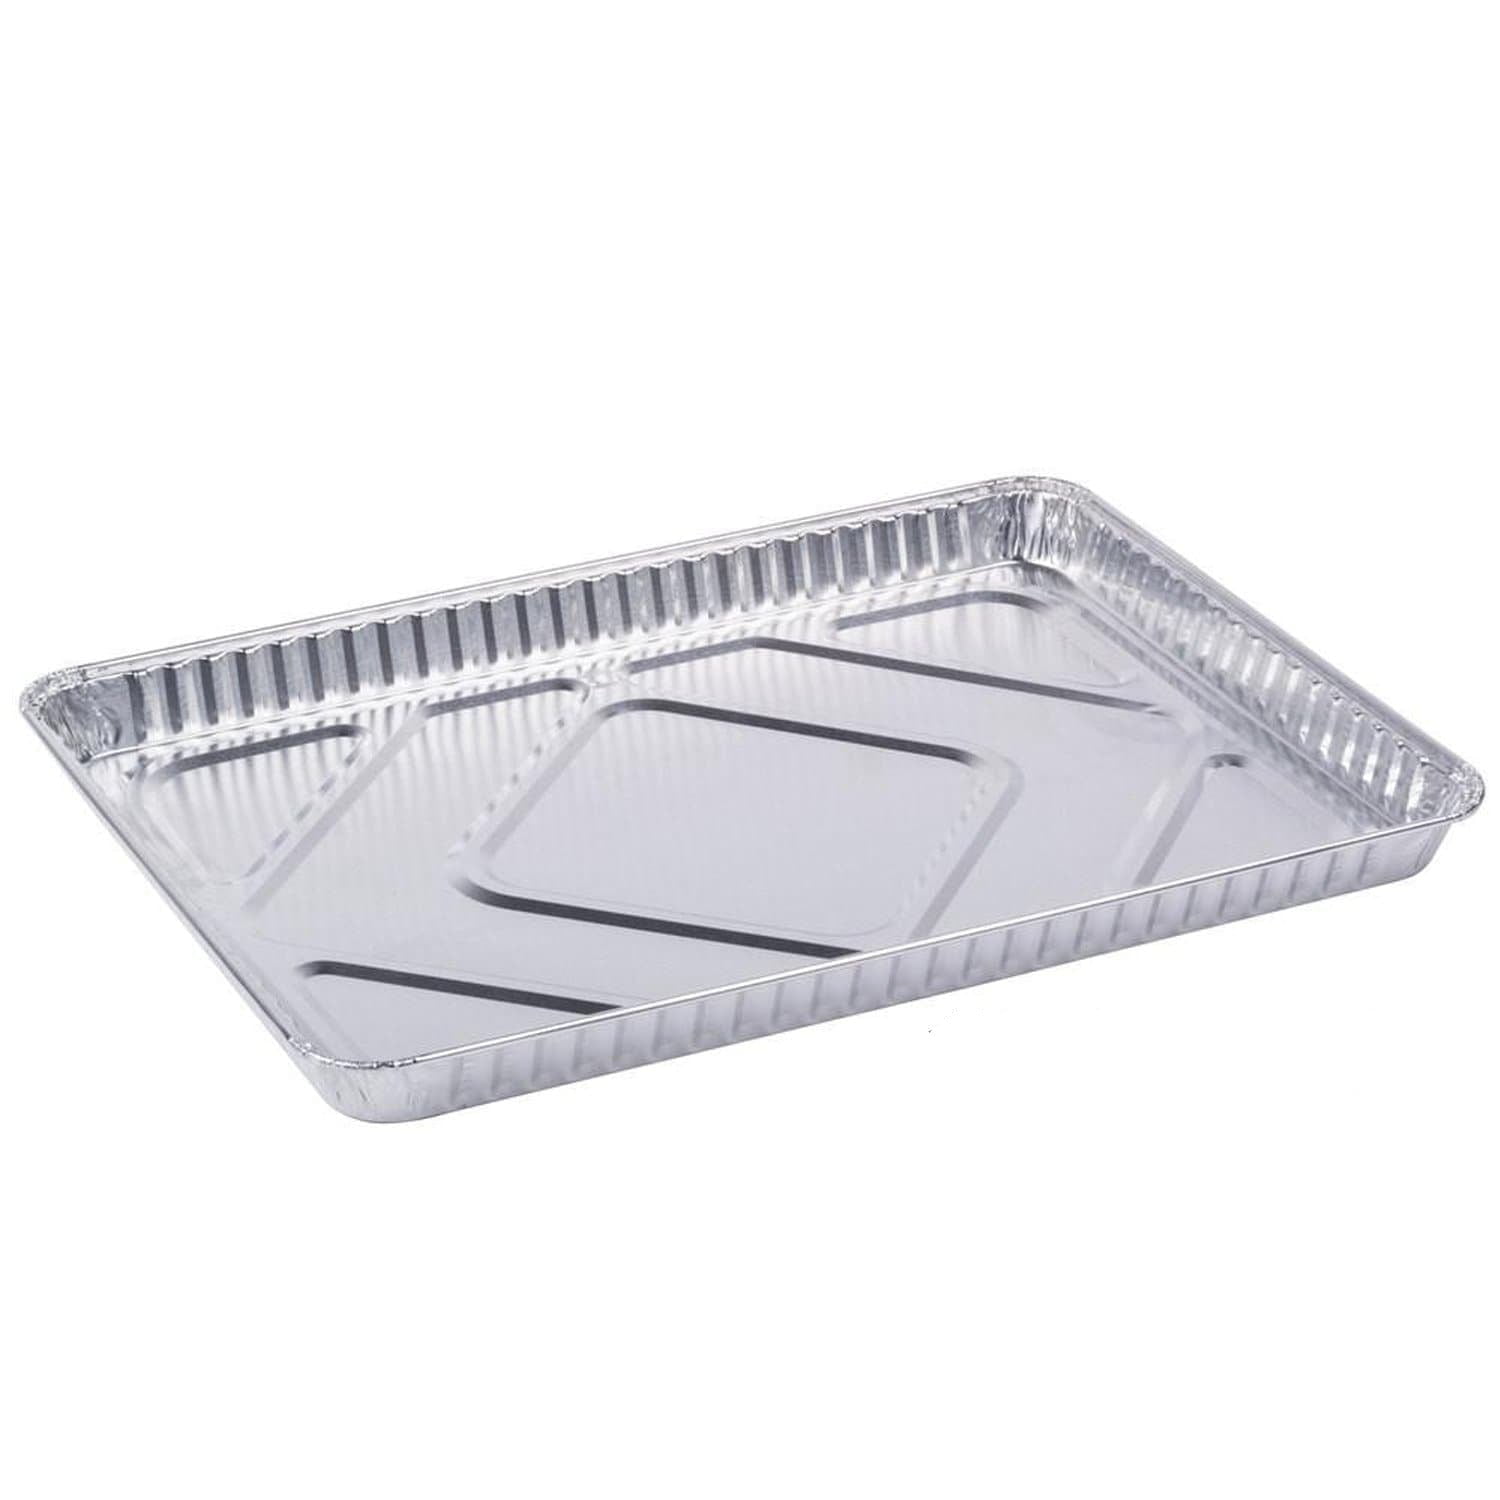 Stock Your Home Aluminum Cookie Sheet Baking Pans, 15 Pack, 16 Inch x